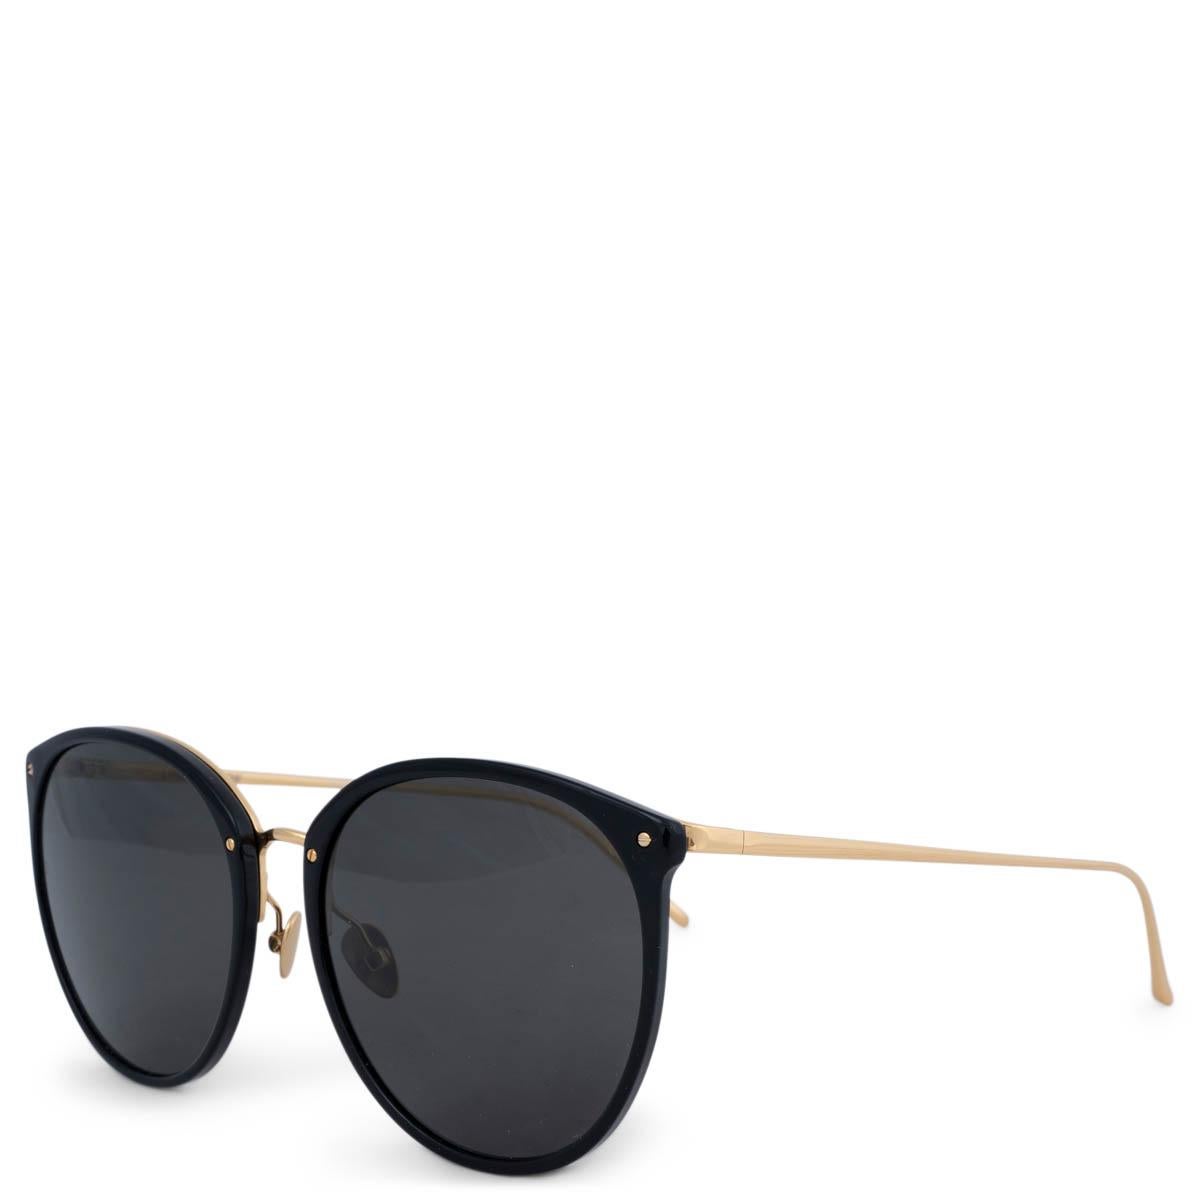 100% authentic Linda Farrow The Kings oversized sunglasses in black acetate with details in 22ct yellow gold-plated titanium. Features solid grey lenses. Have been worn and are in excellent condition. No case.

Measurements
Model	5965